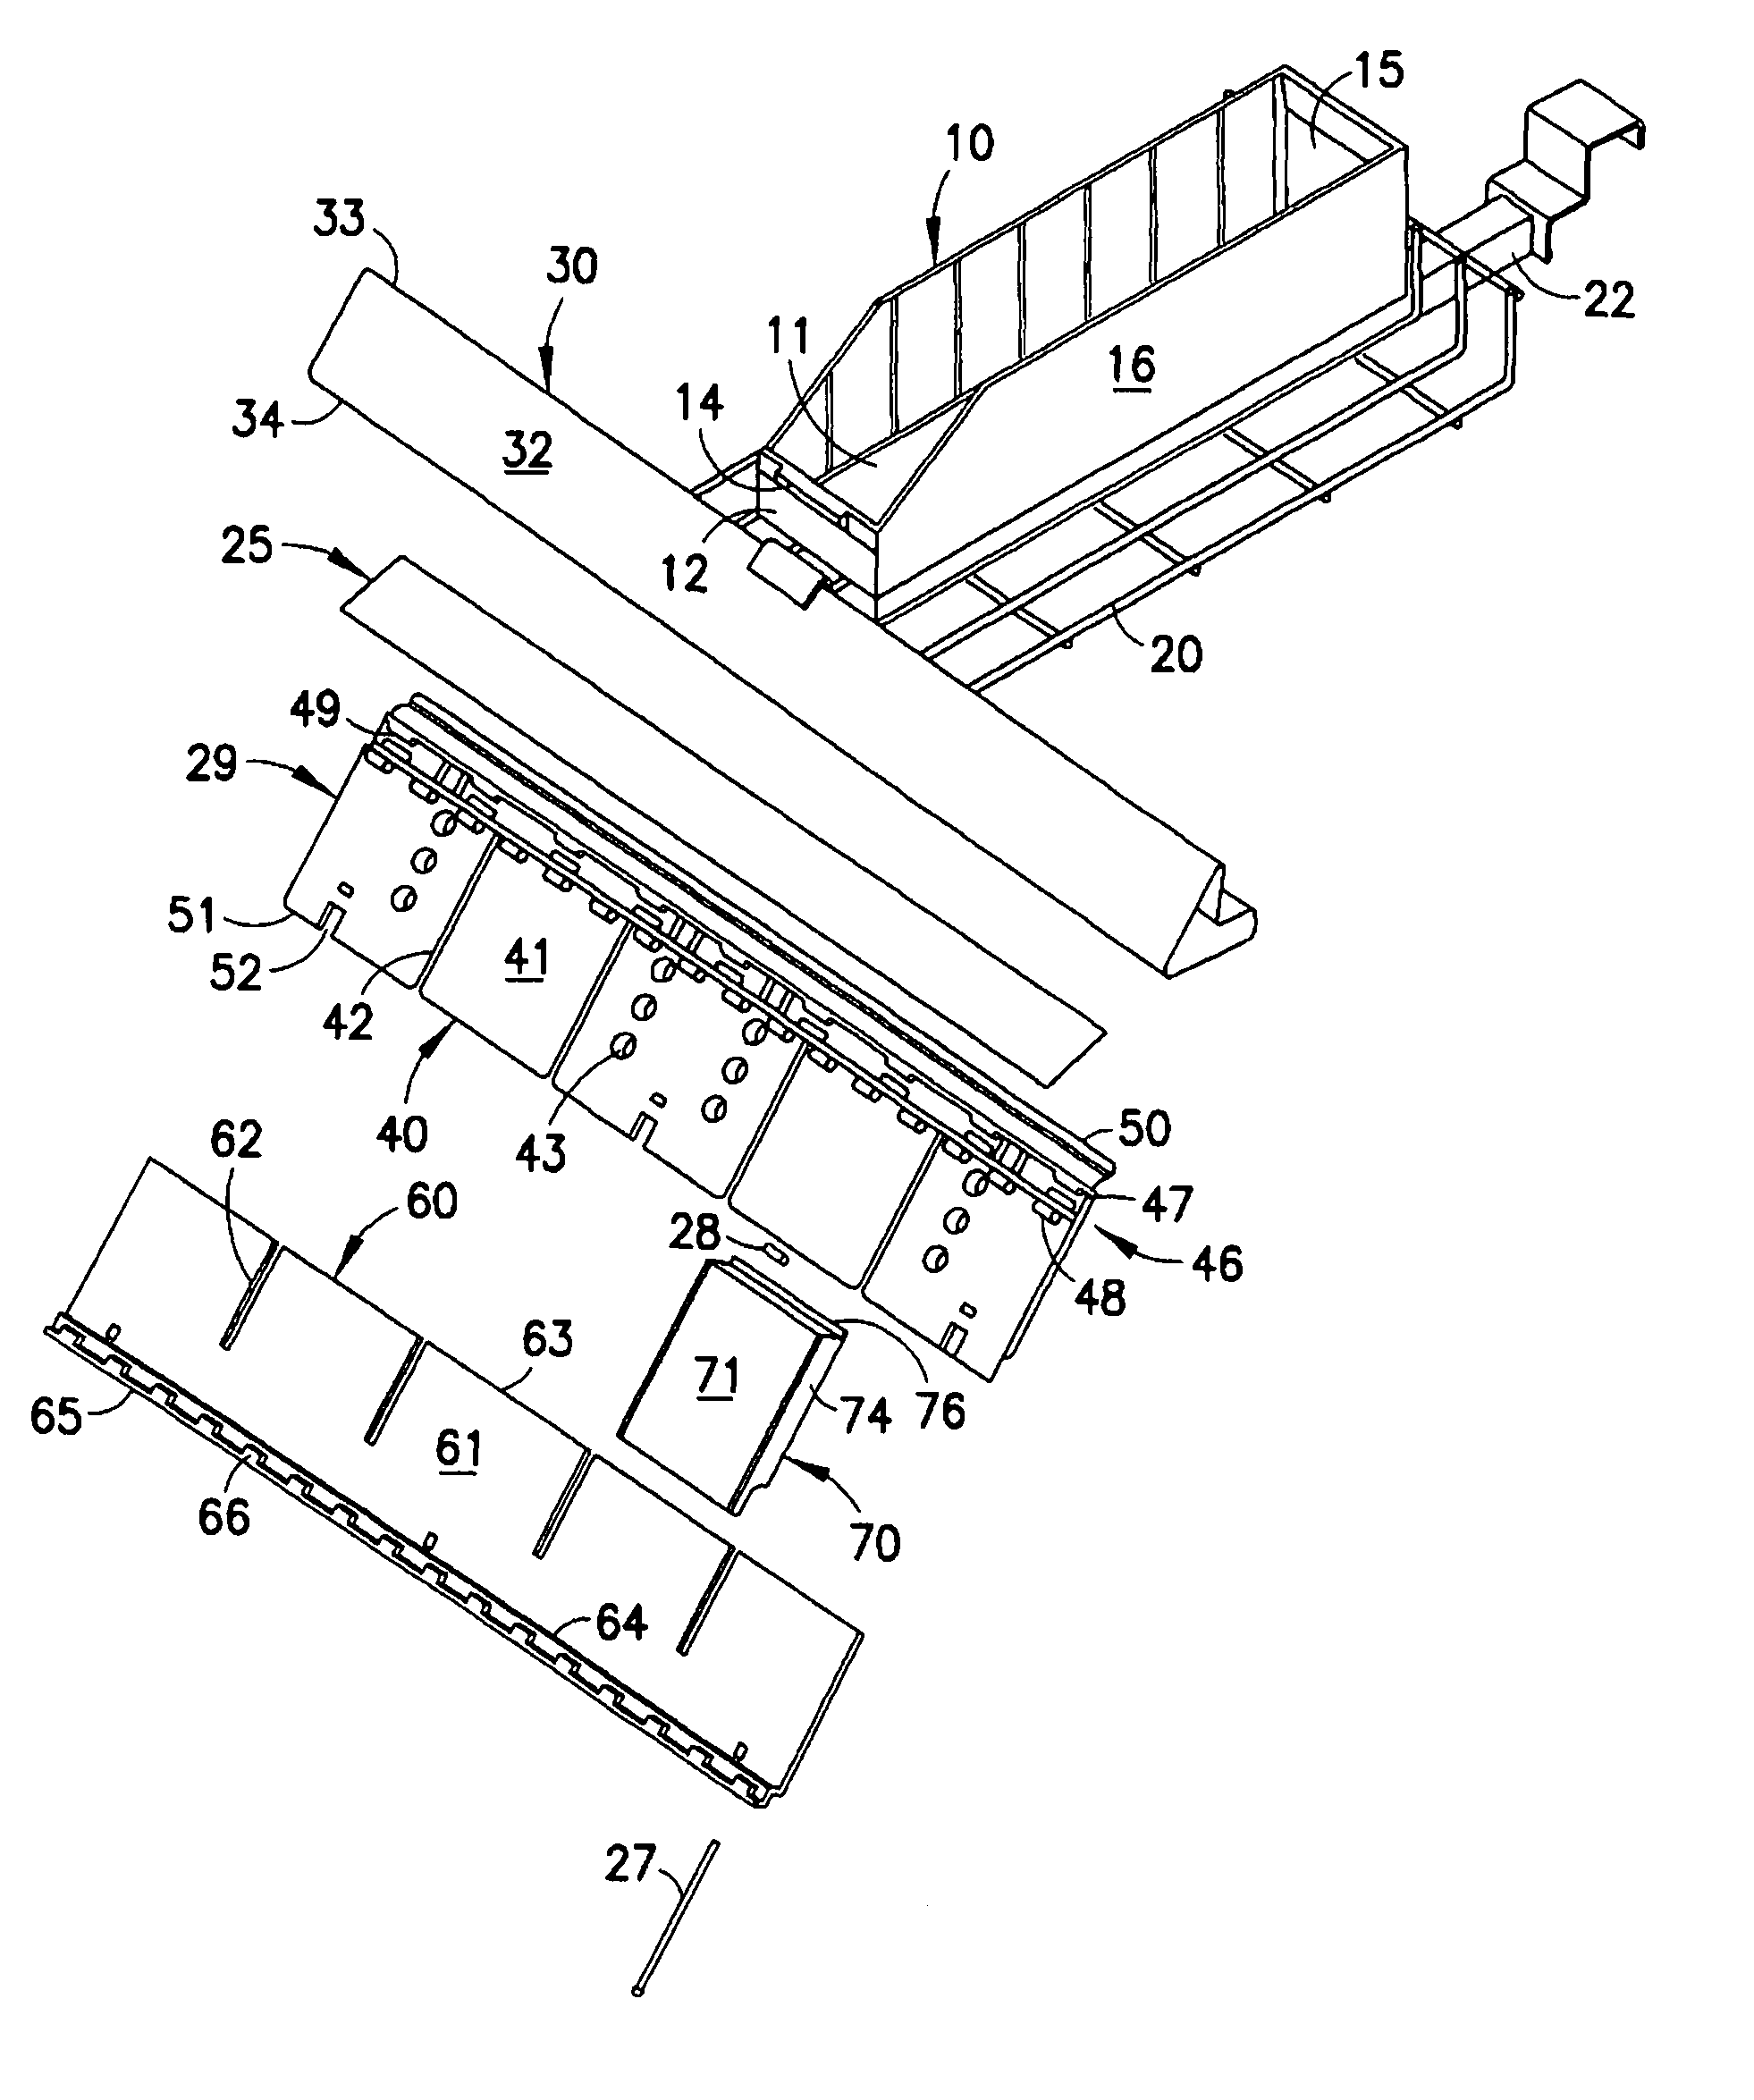 Display system with adjustable product holder track